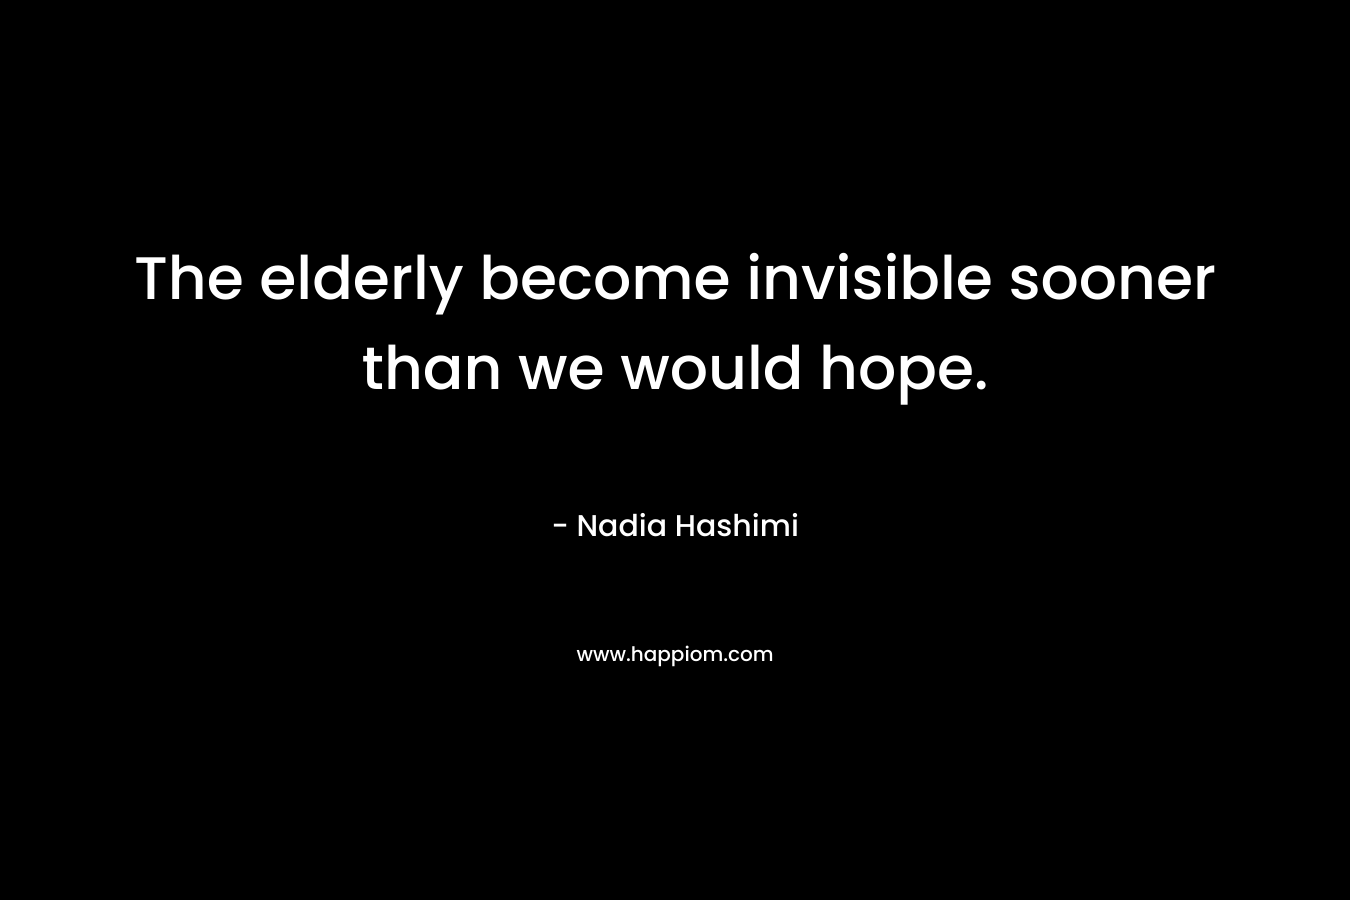 The elderly become invisible sooner than we would hope.